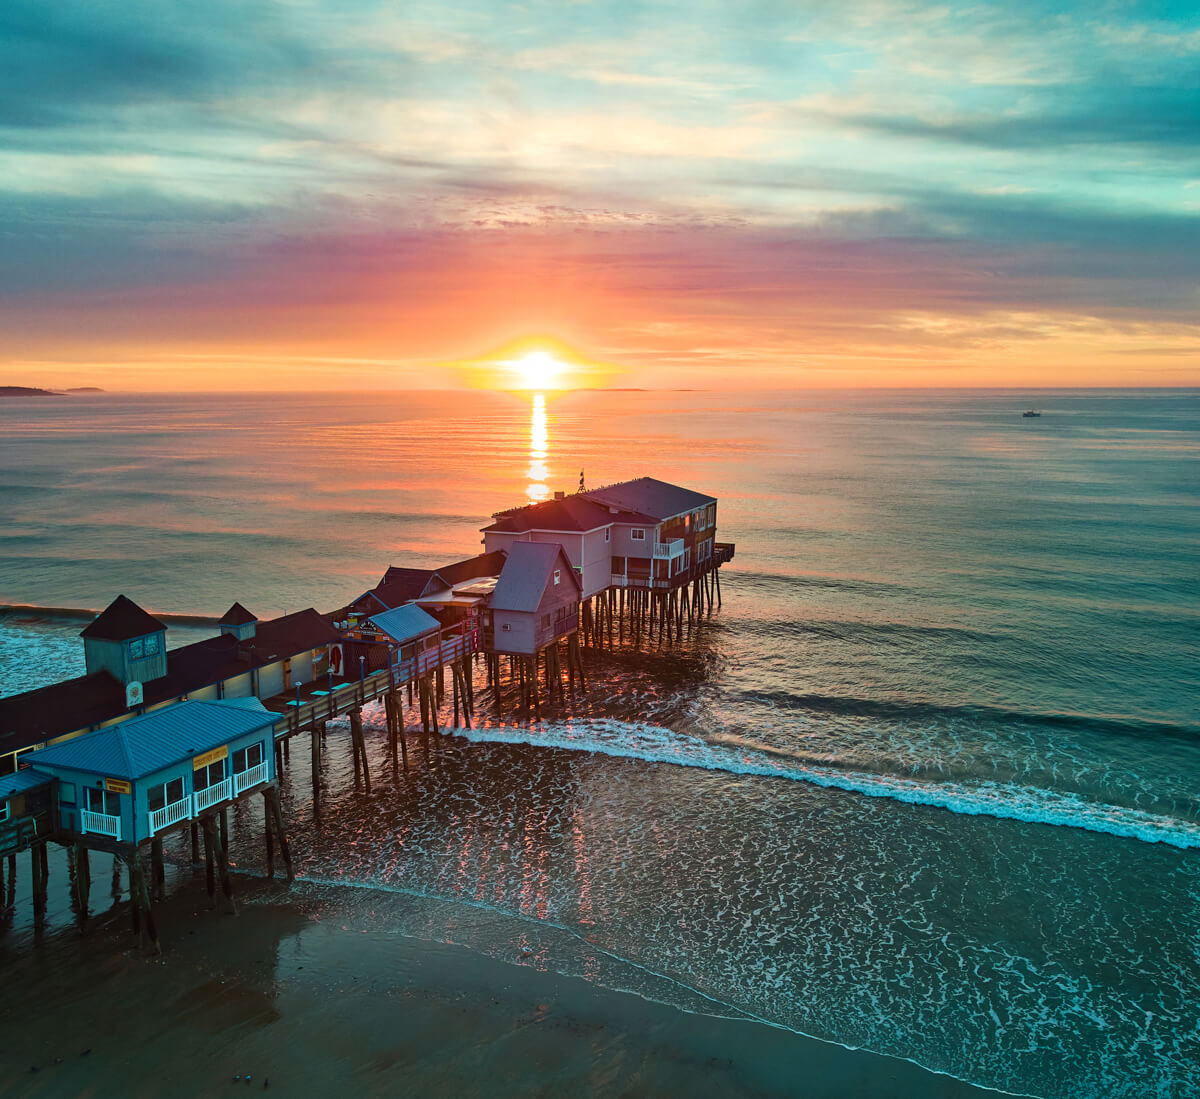 Old Orchard Pier at sunrise facing ocean